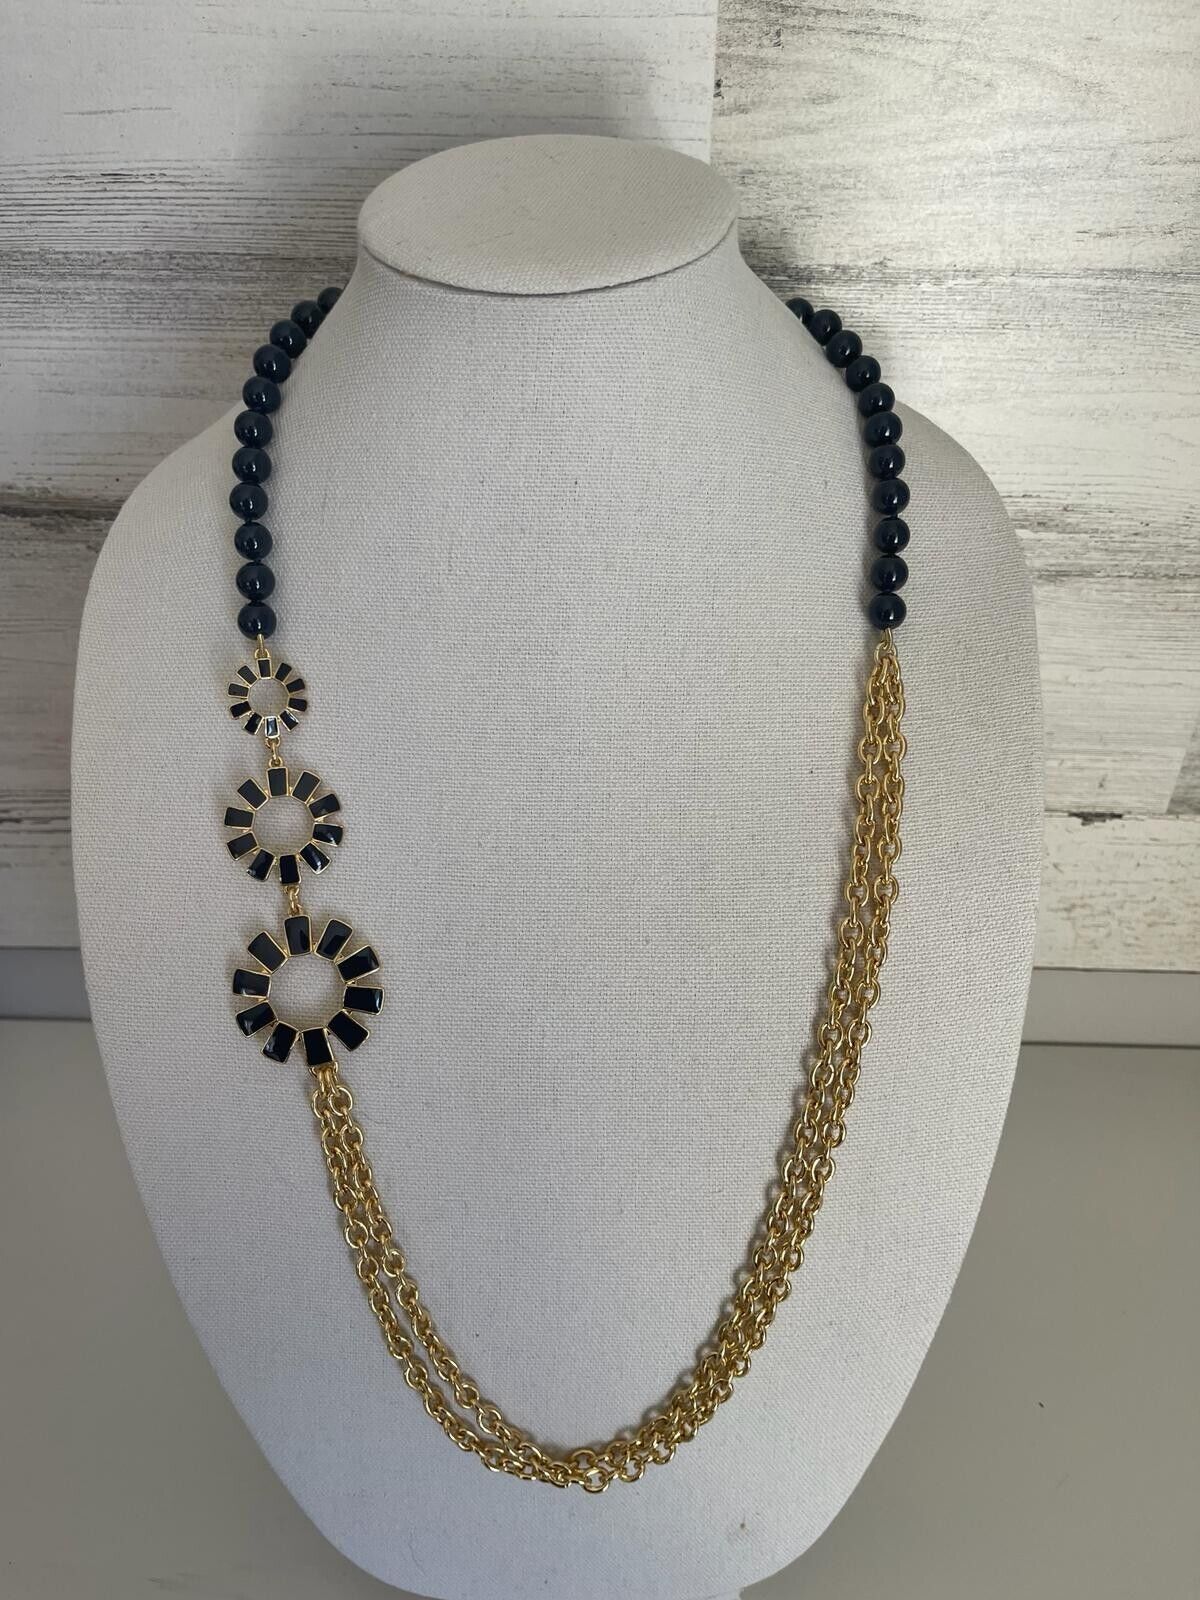 Talbots Adjustable Navy Blue Double Strand Chain Beaded Necklace NEW - $14.24